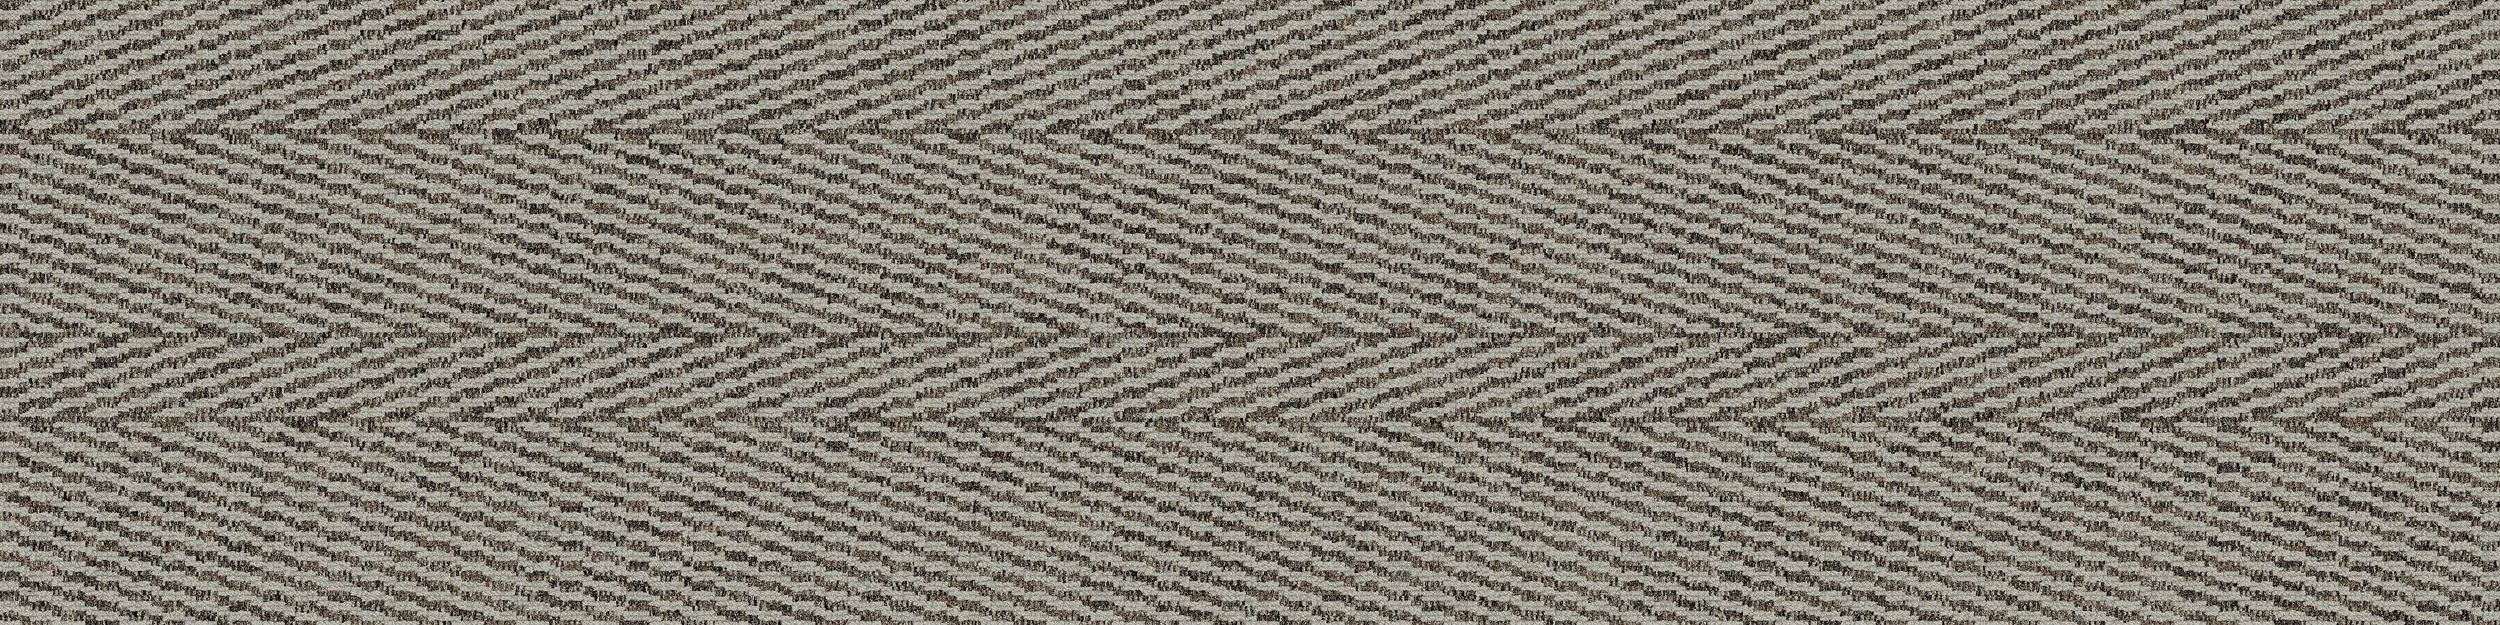 Stitch In Time Carpet Tile In Linen Stitch image number 2